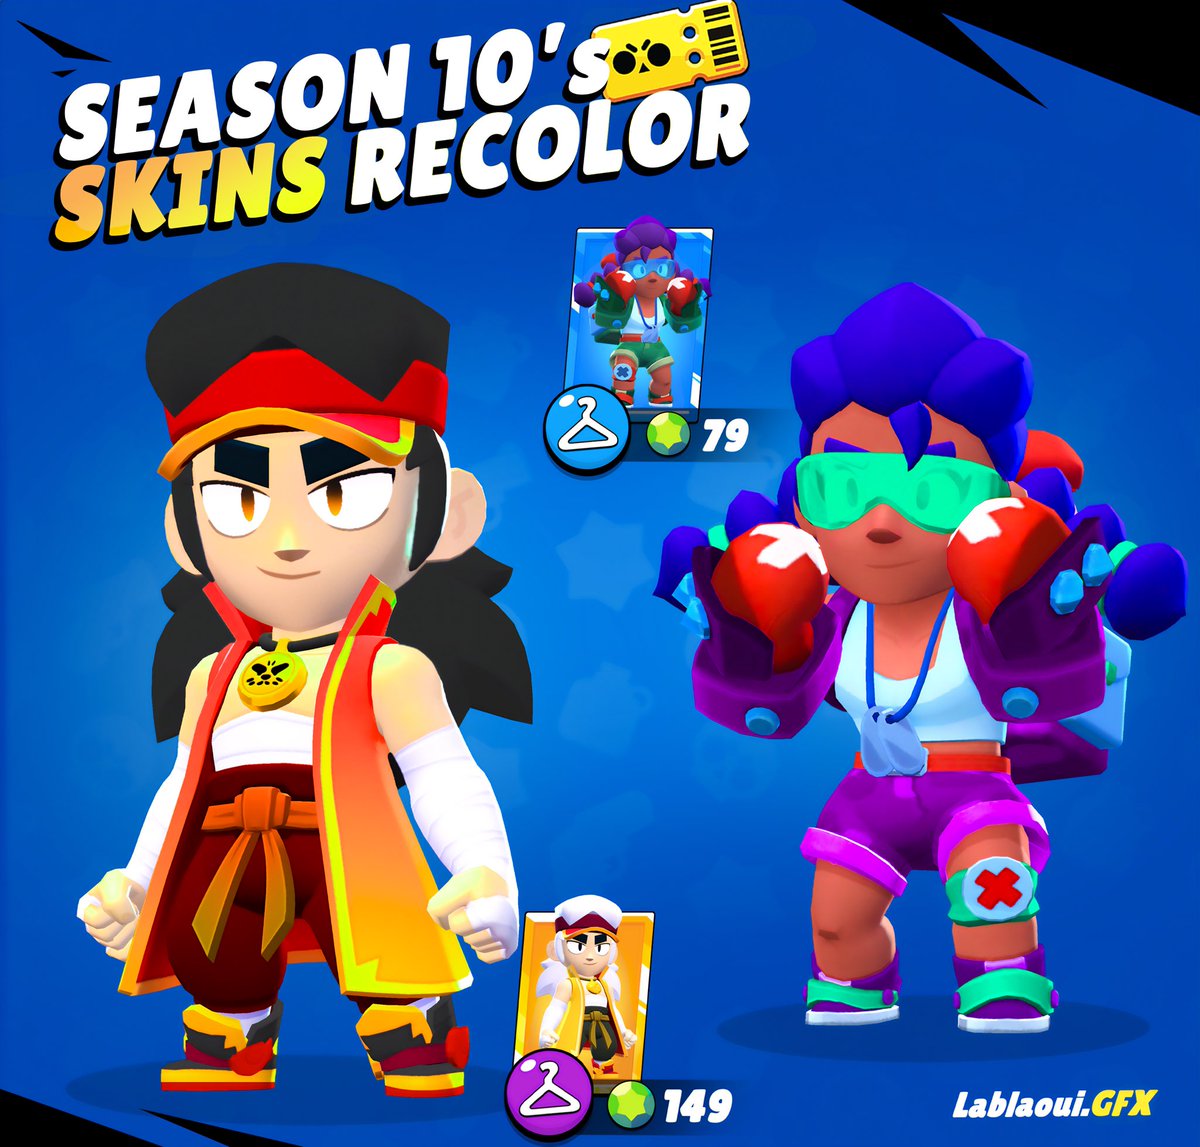 Season 10 Recolors Are here 🔥 The last Brawl Pass exclusive set 🥲 And yeah I know fang got a recolor 👍 #BrawlStarsArt #Brawlstars